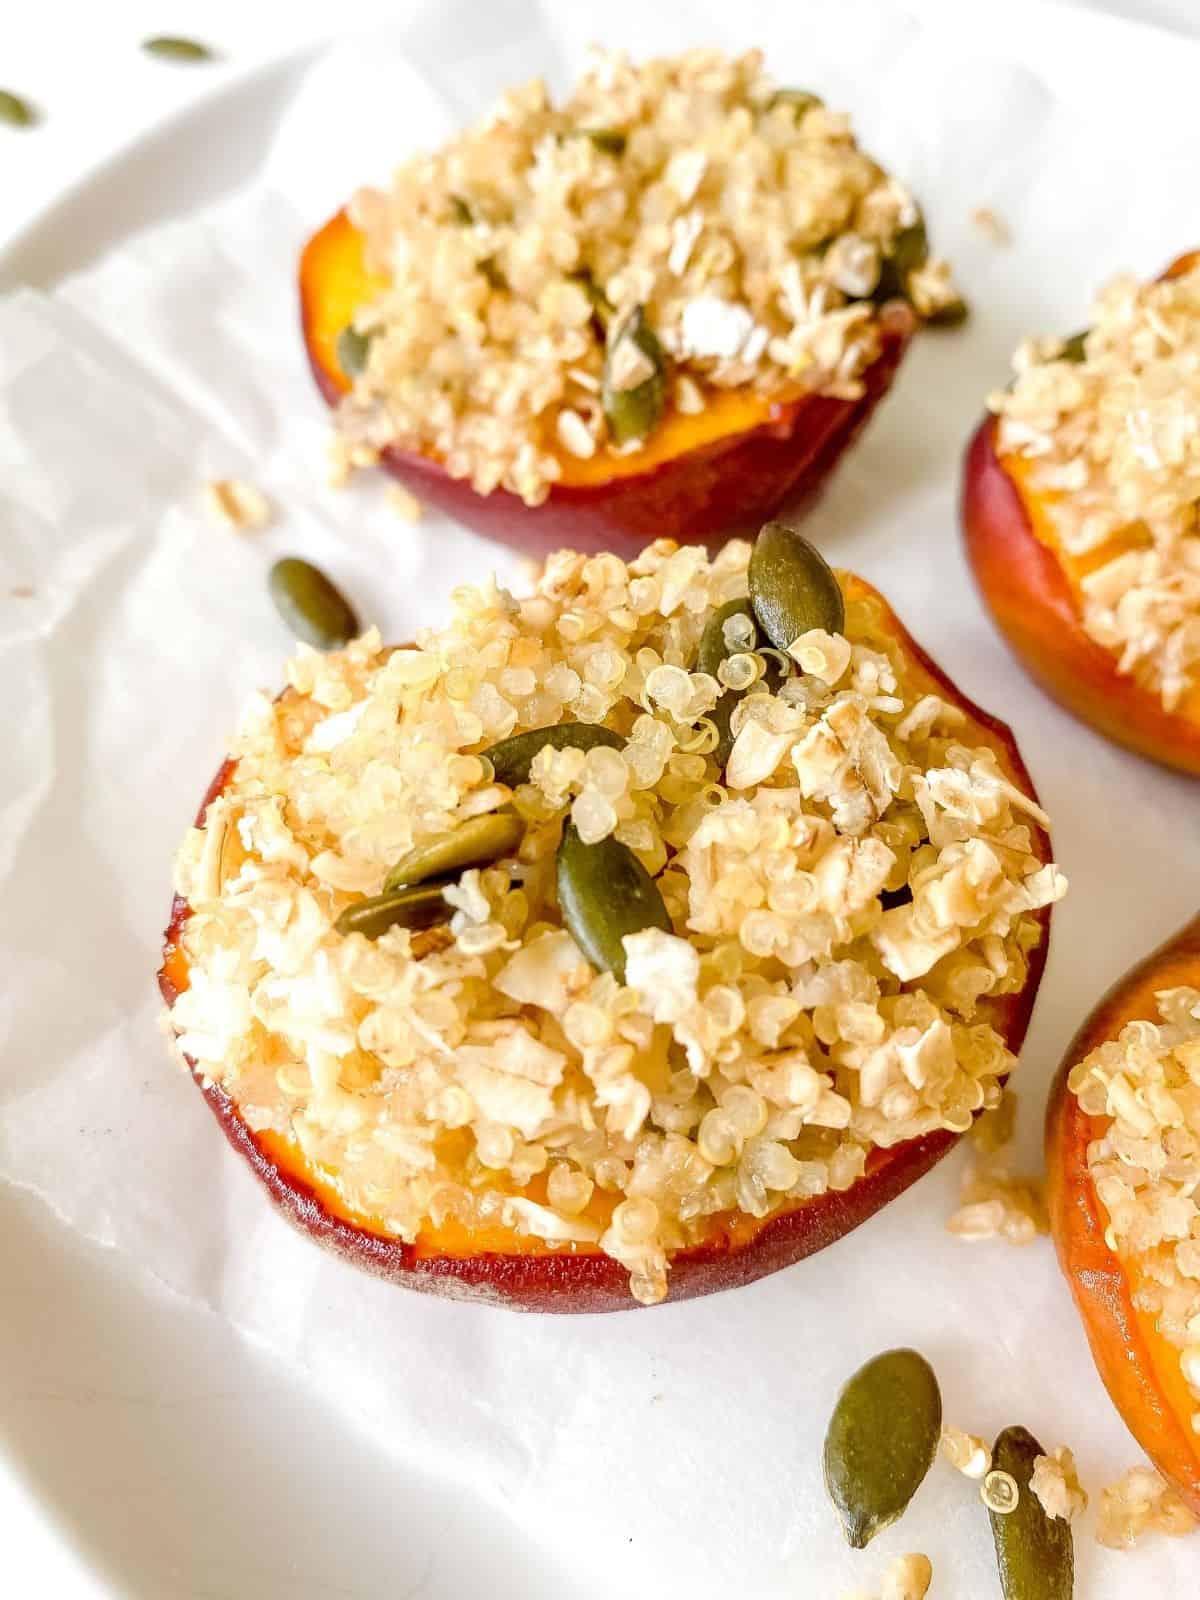 baked peaches with a crumble topping on a white plate.